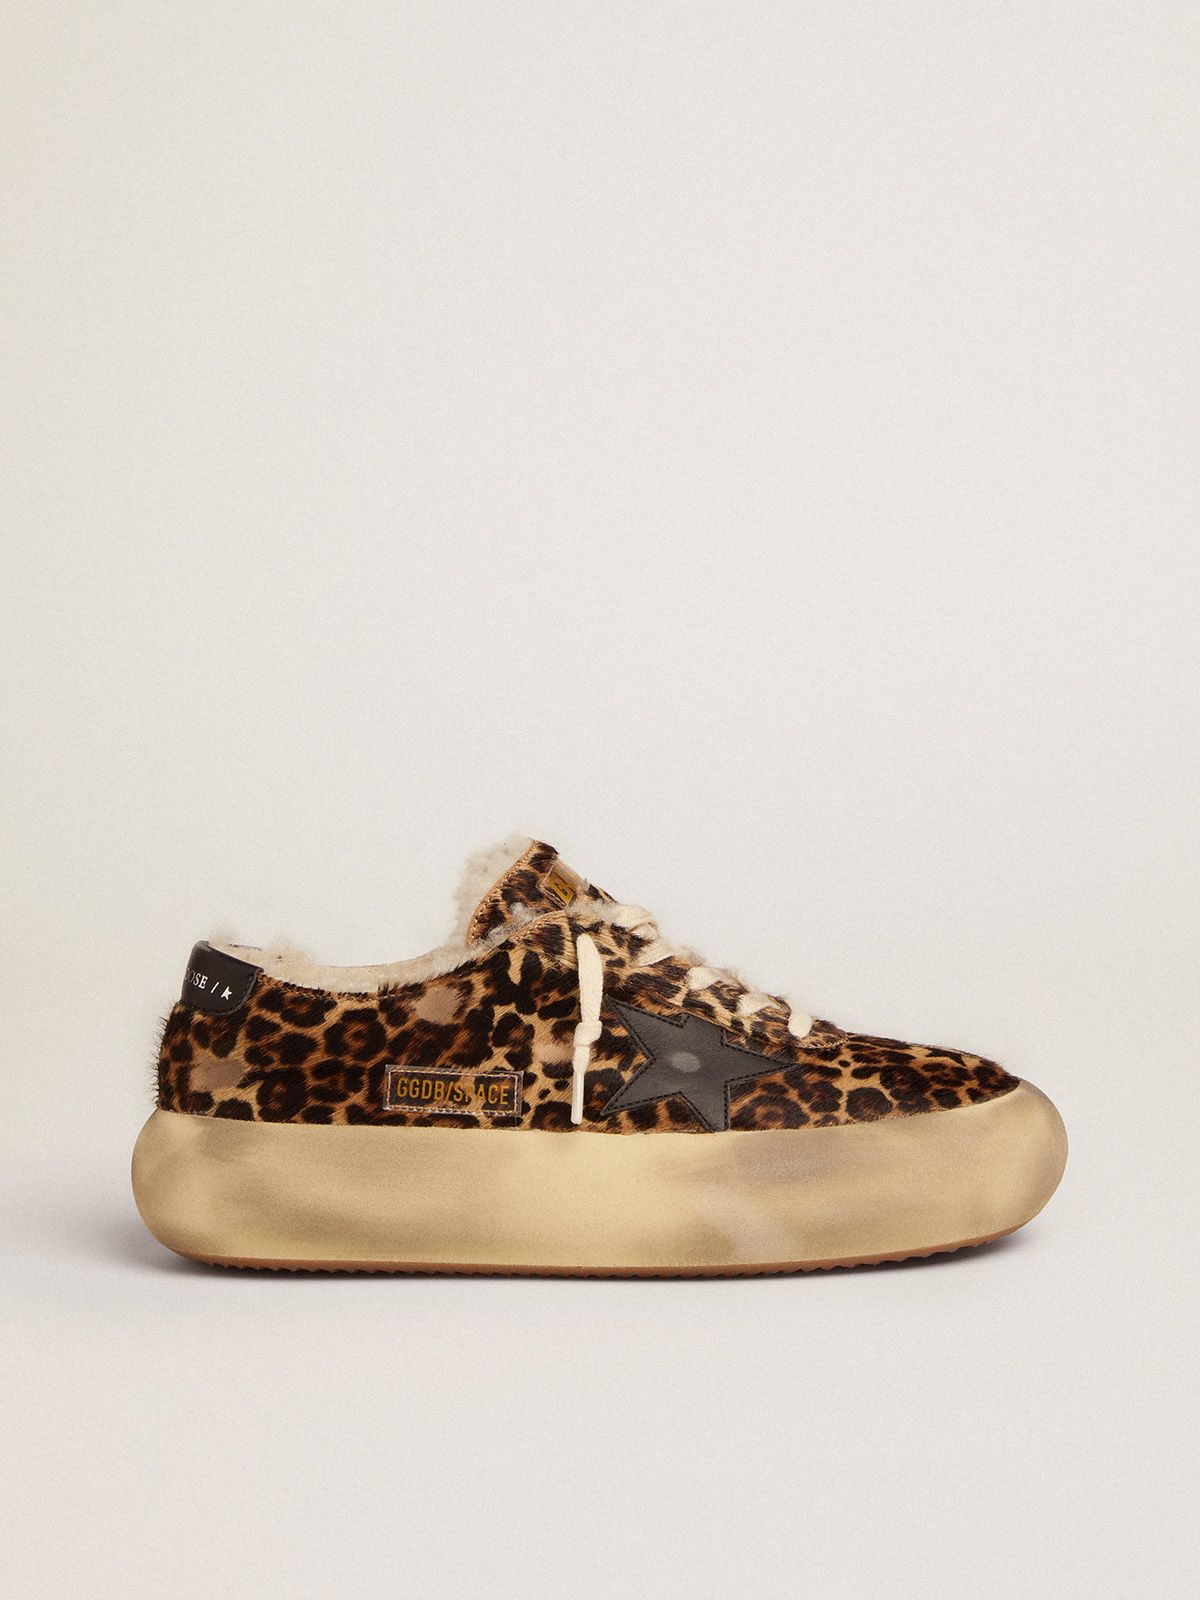 Golden Goose Saldi Space-Star shoes in animal-print pony skin with shearling lining